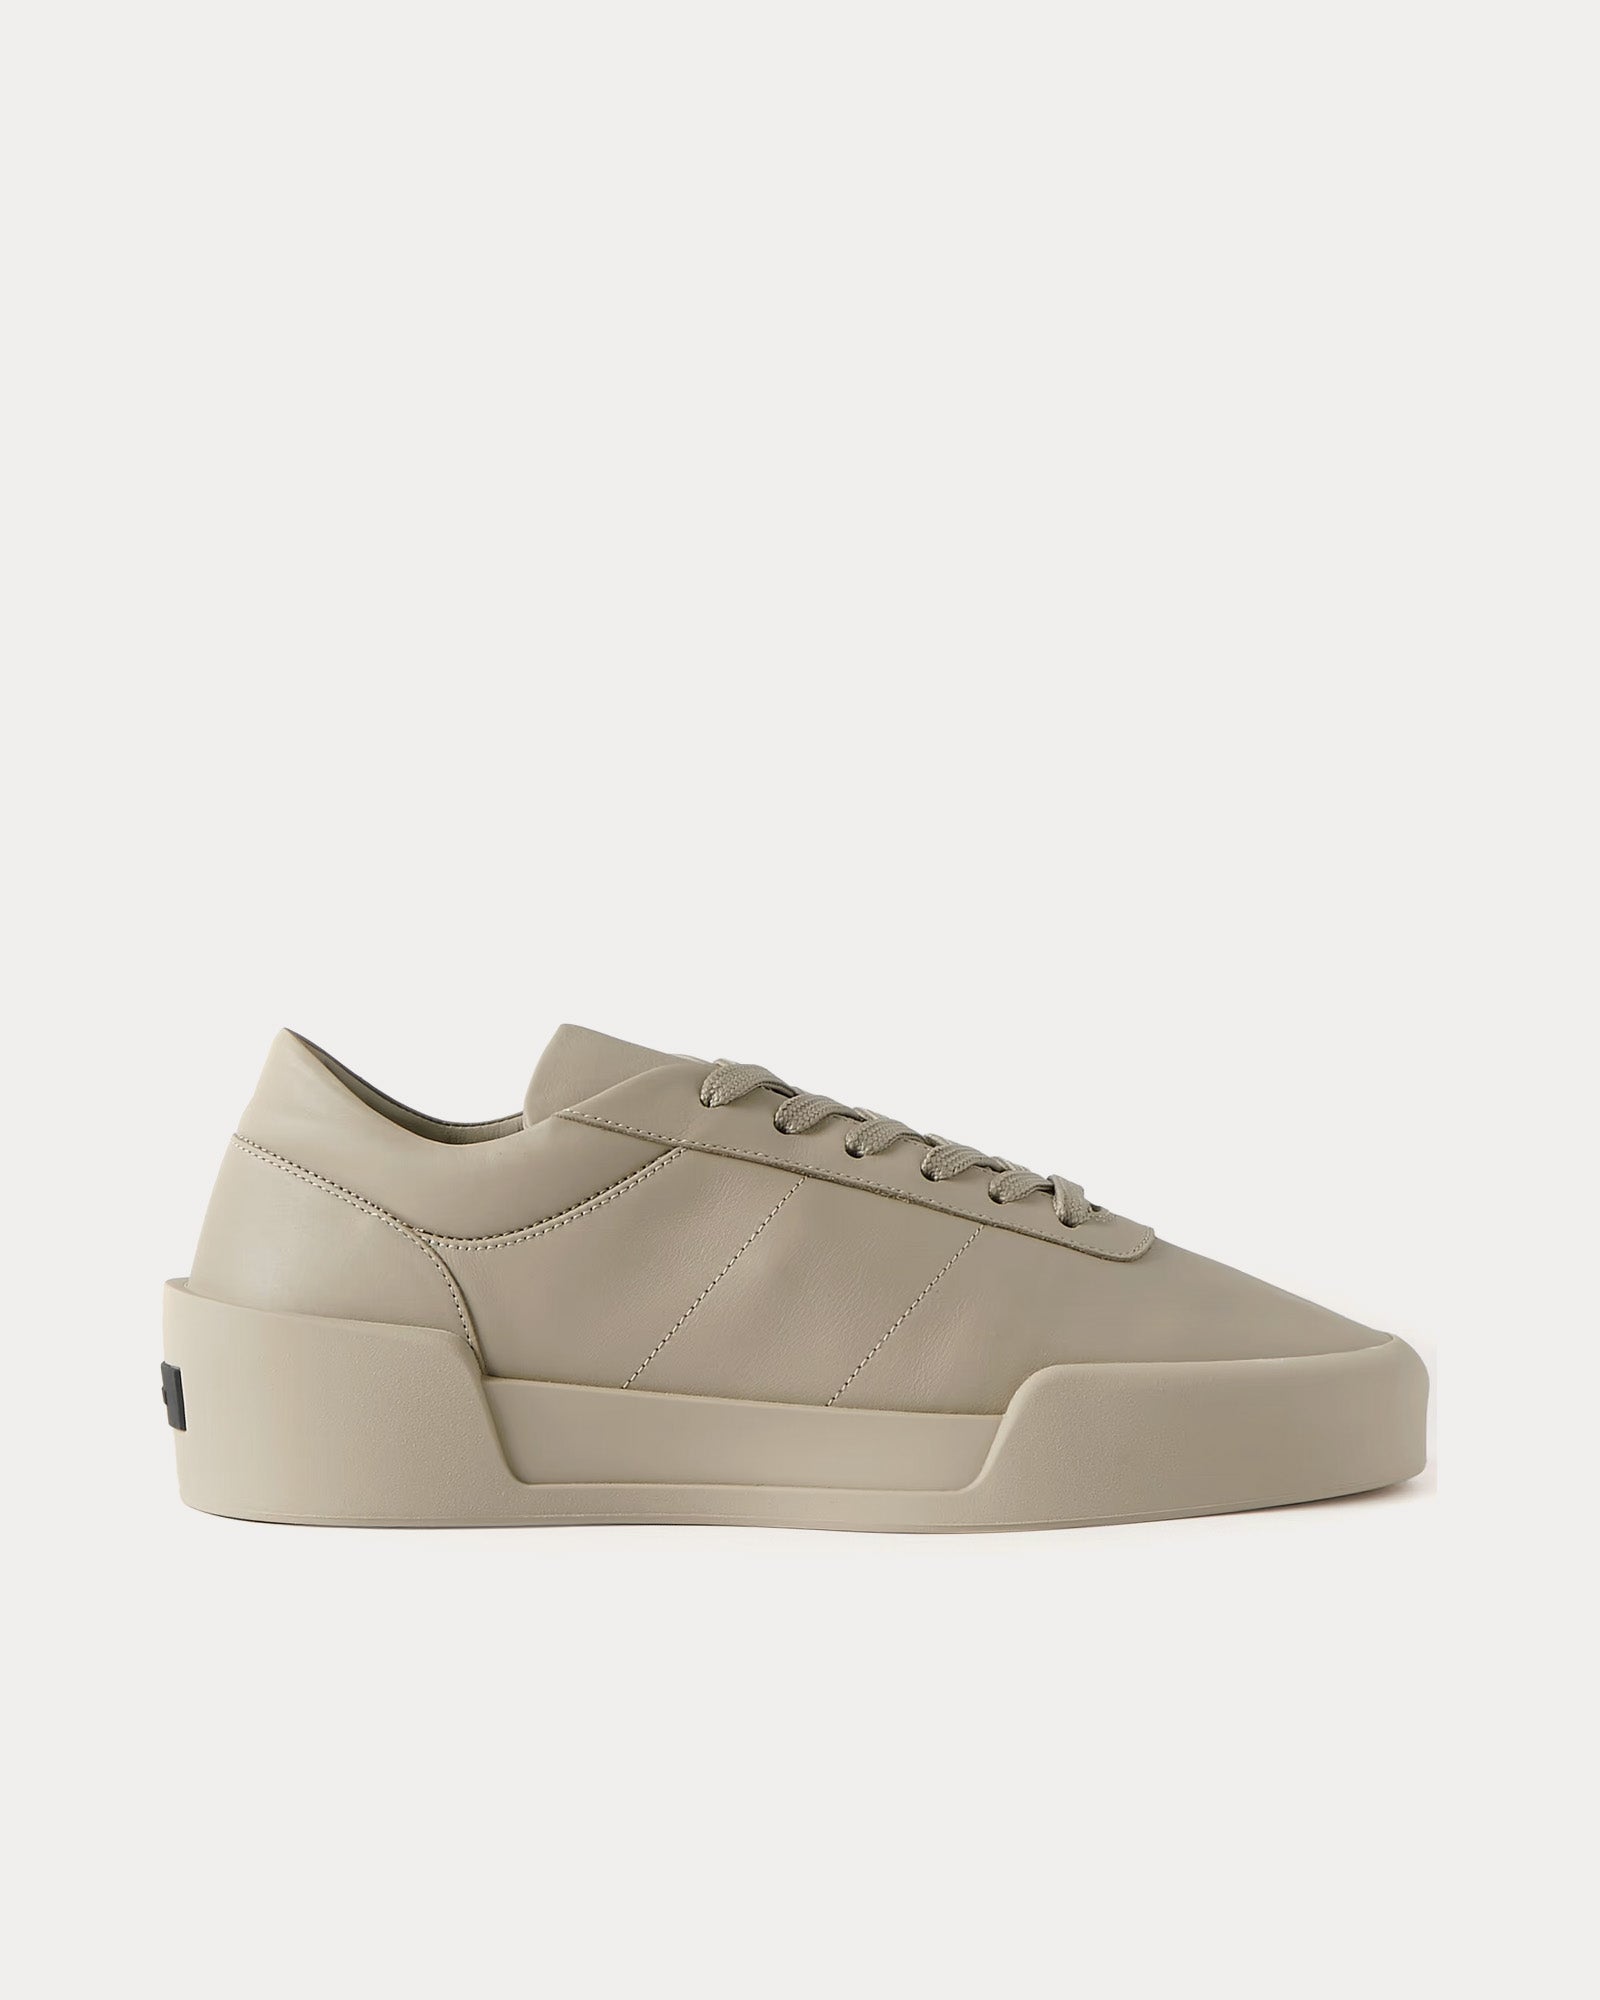 Fear of God - Aerobic Low Taupe Low Top Sneakers